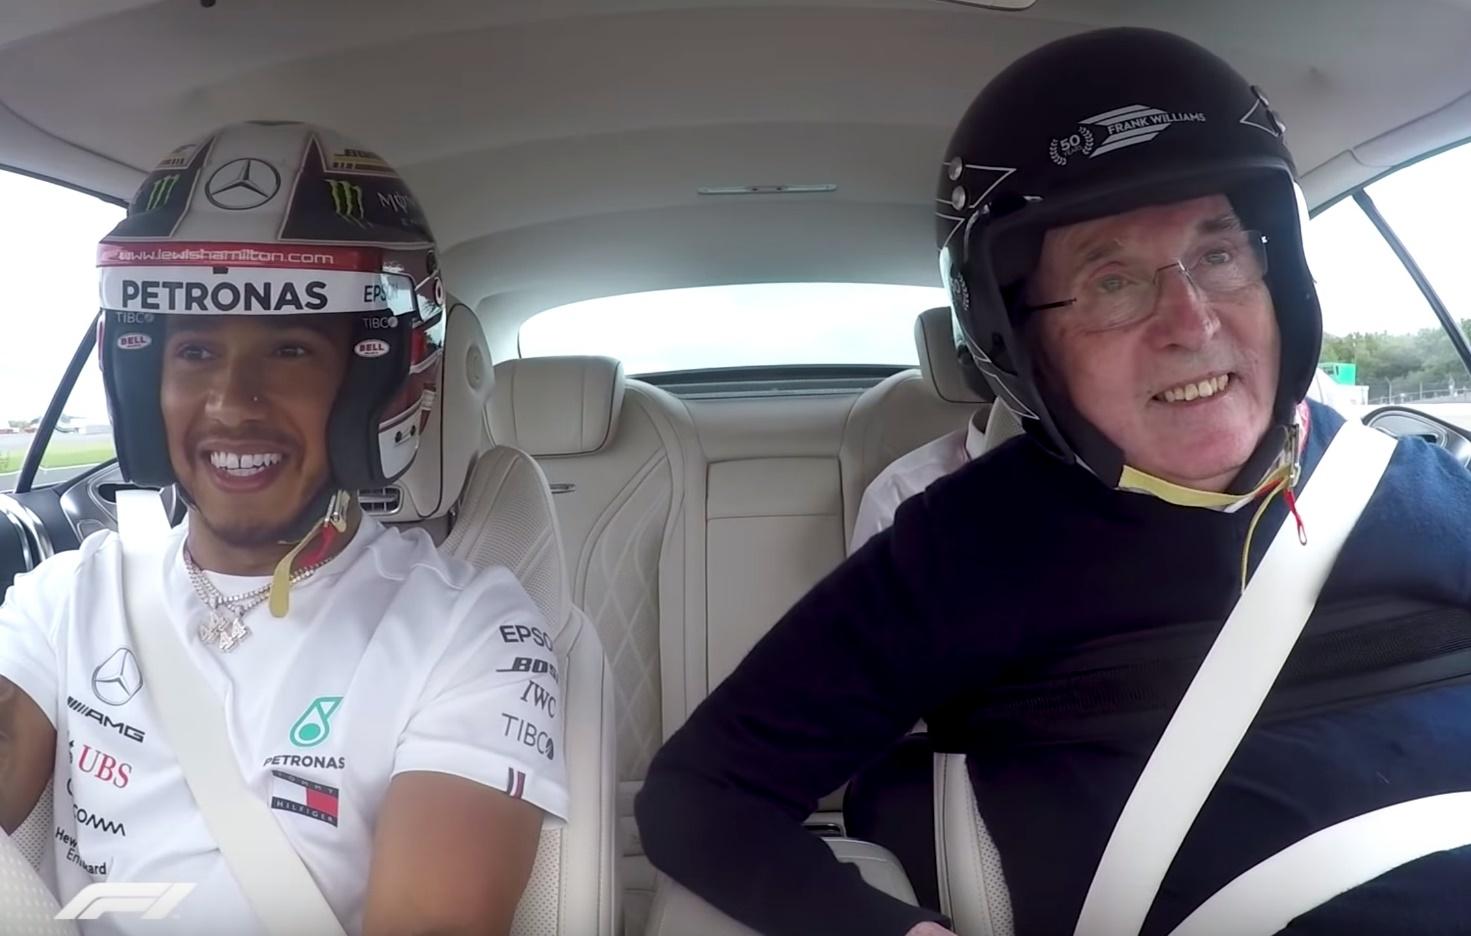 Frank Williams' emotional passenger ride with Lewis Hamilton is truly wholesome.